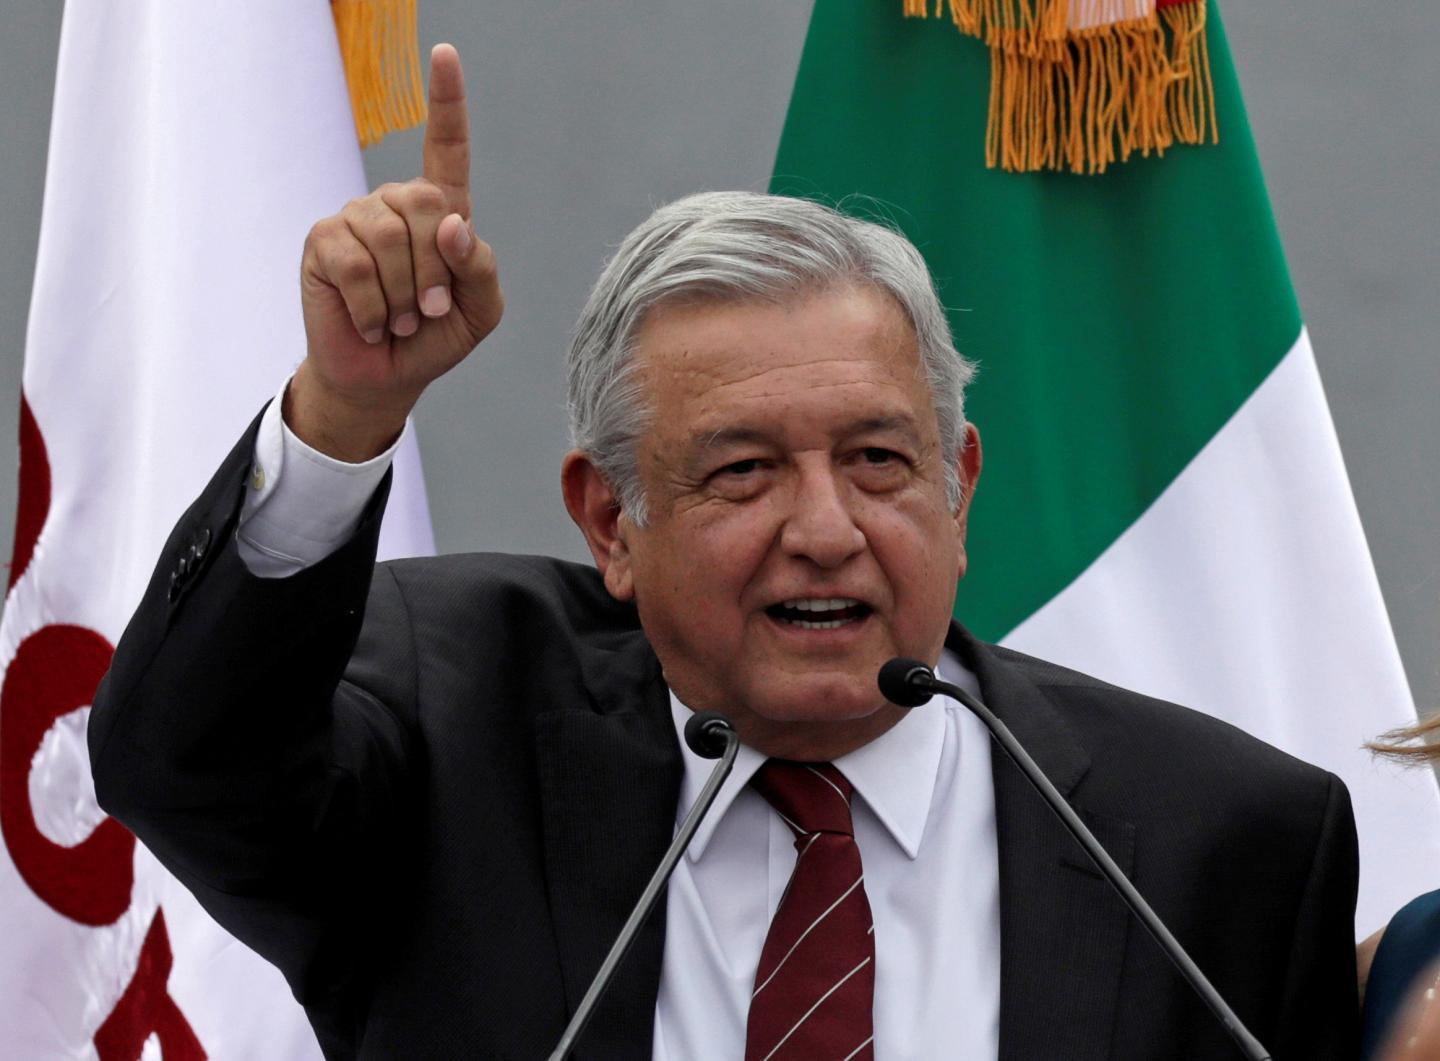 Who is Andrés Manuel Lopez Obrador? Presidential Candidate Who Vowed